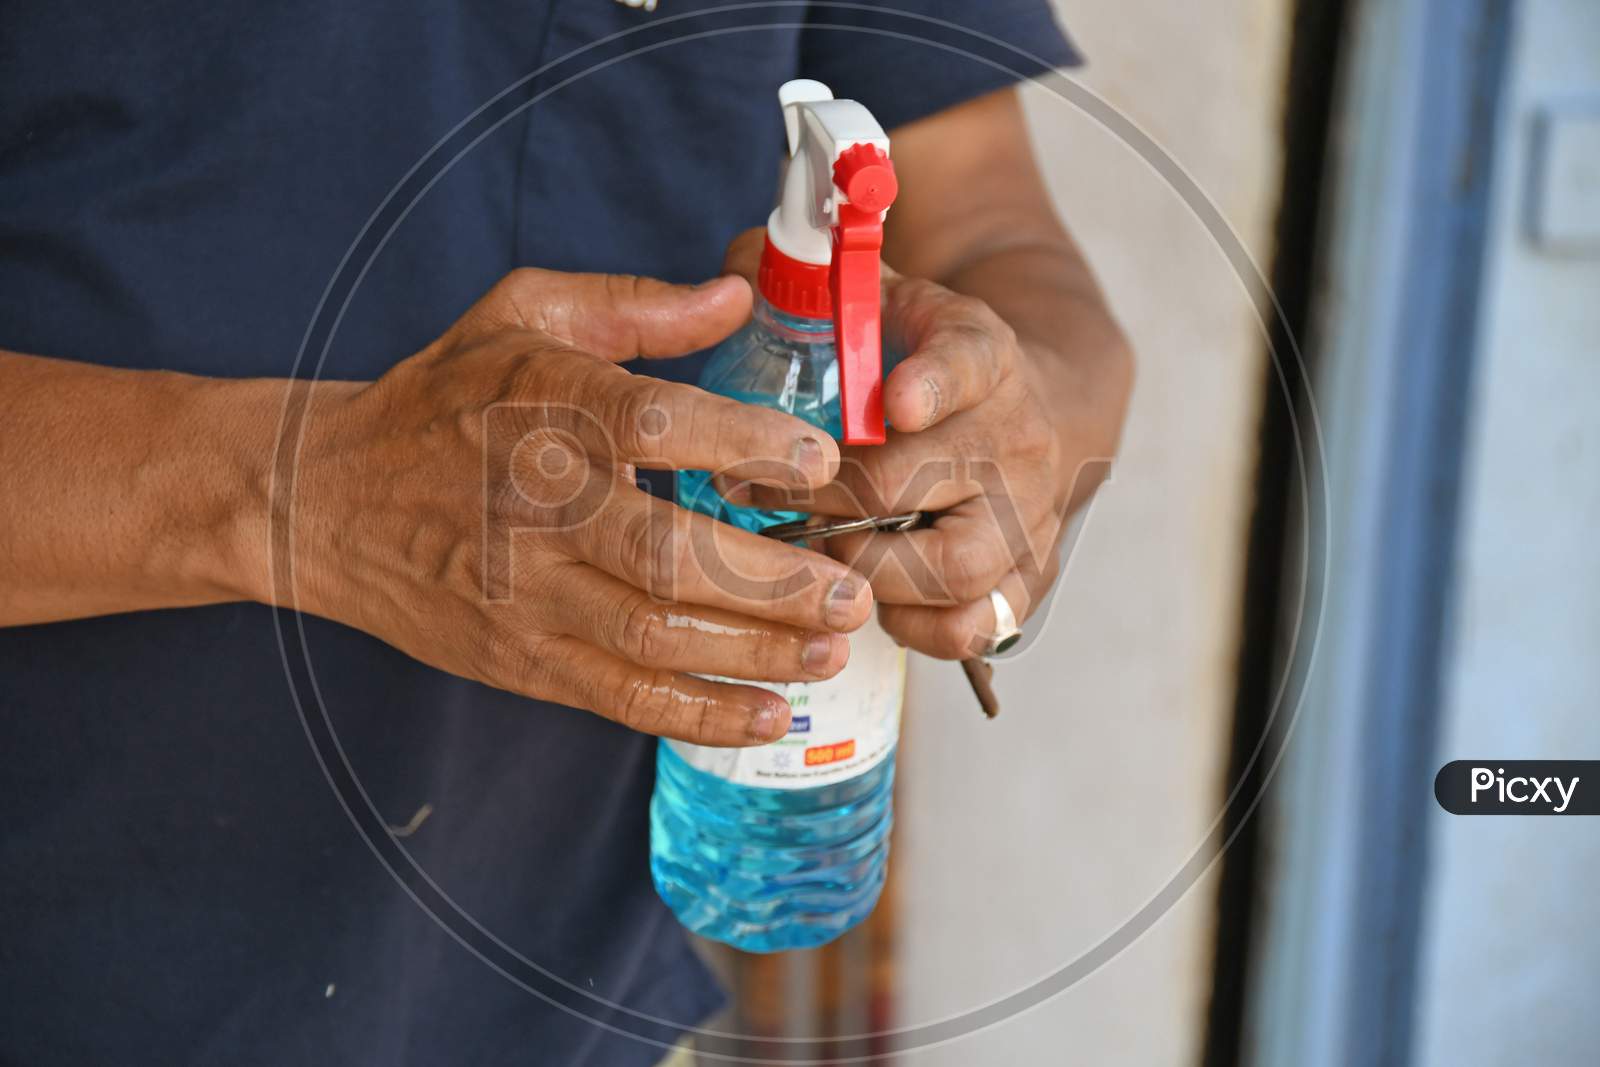 People are using alcohol based hand sanitizers to prevent Novel Coronavirus (COVID-19) infections. At Burdwan Town, Purba Bardhaman District, West Bengal, India.